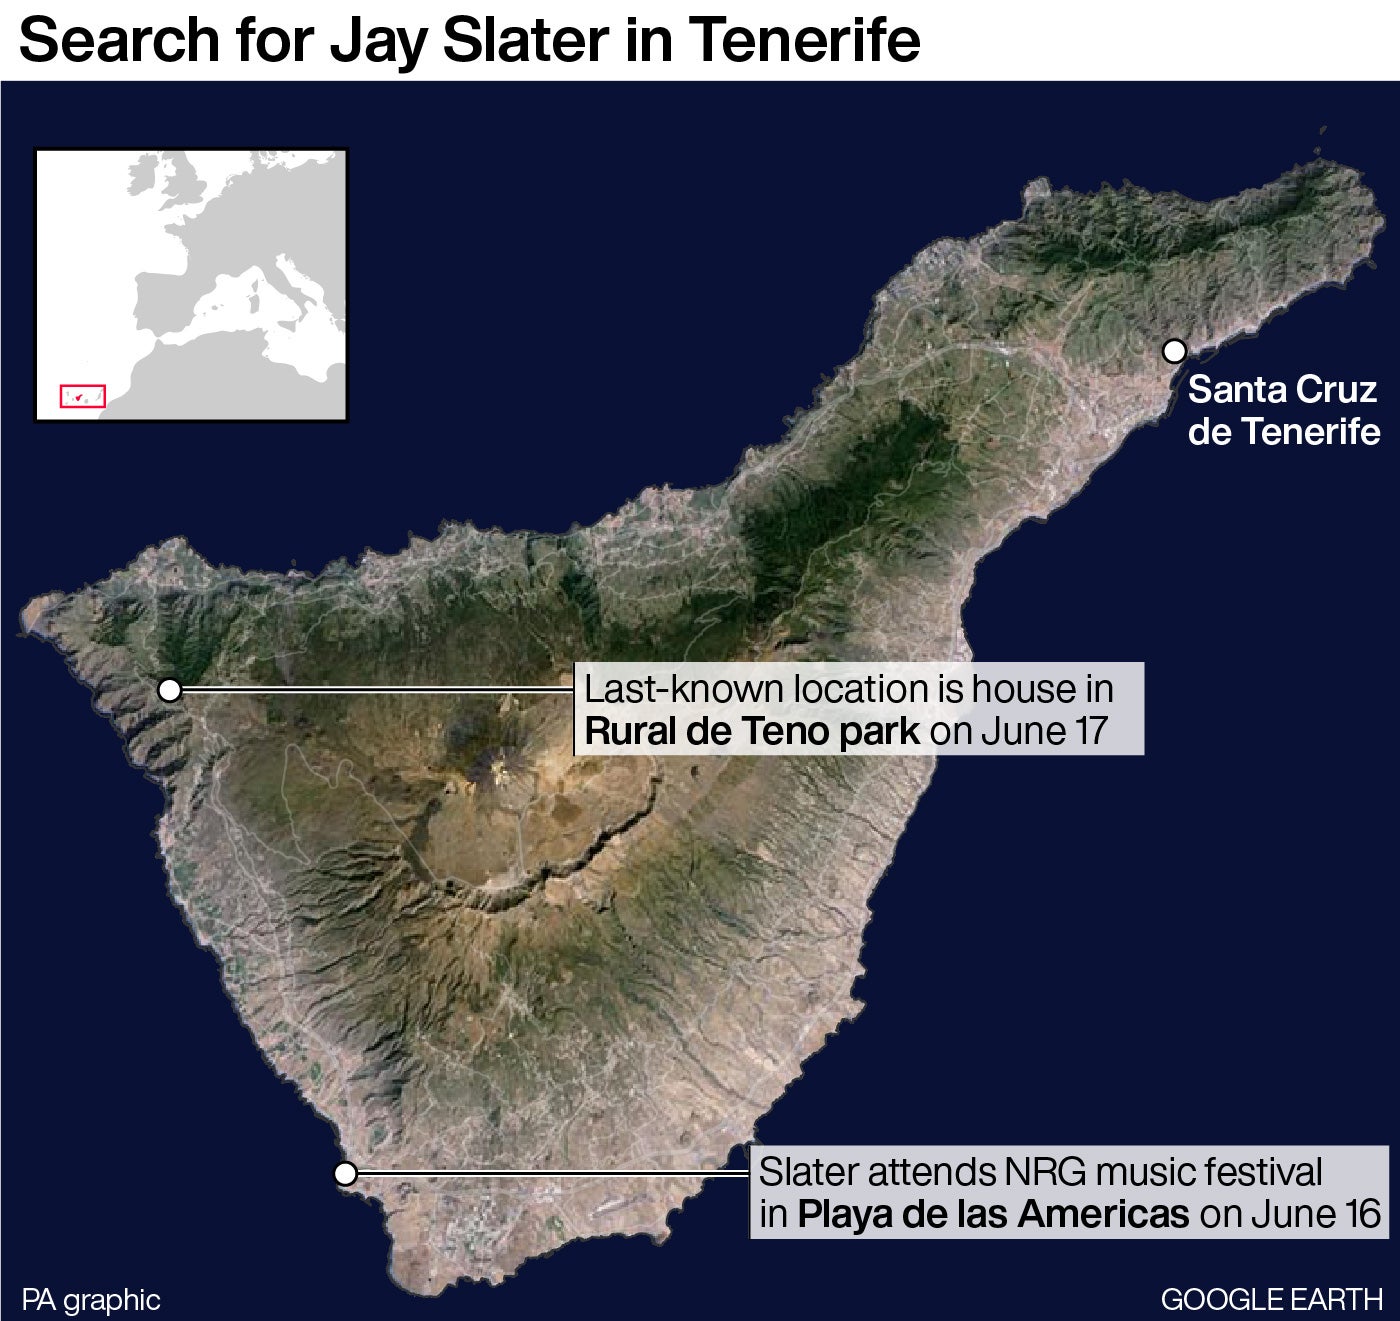 guardia civil, emergency workers, tenerife, missing person, retracing jay slater’s last steps – emergency workers desperately search for missing teen